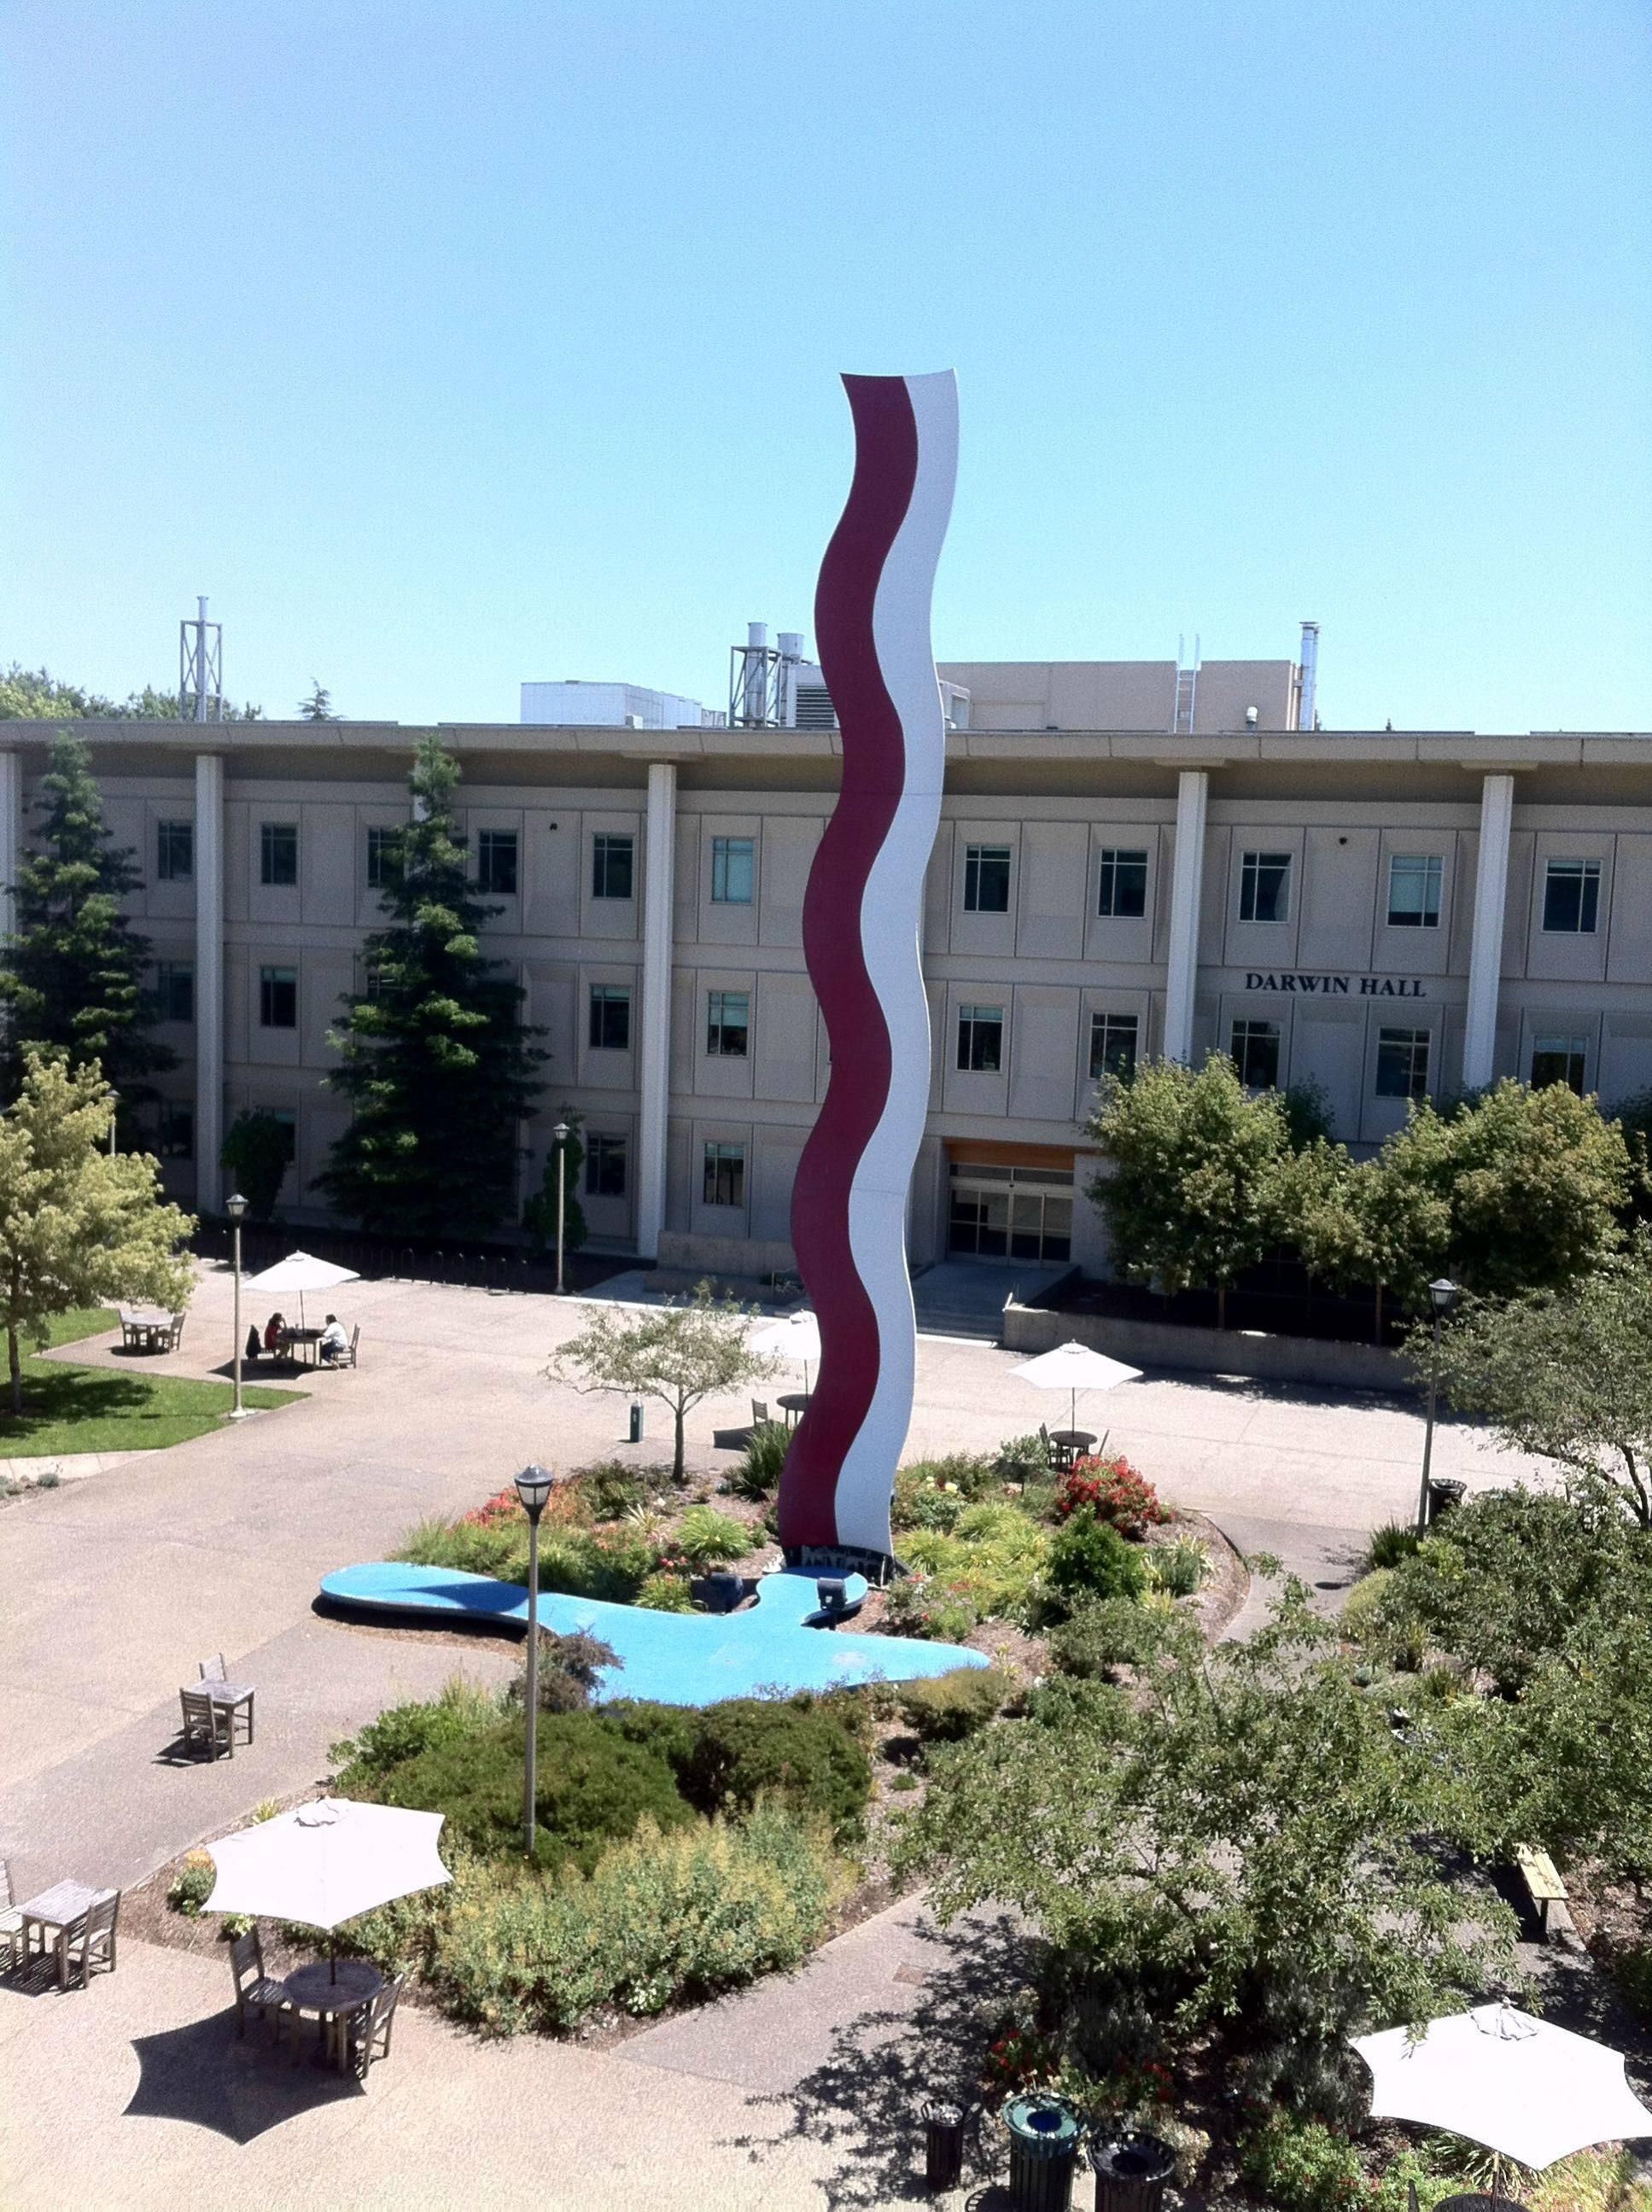 A stupid statue we can all agree on: "Bacon & Eggs" at Sonoma State University is 60 ft tall and cost $6800